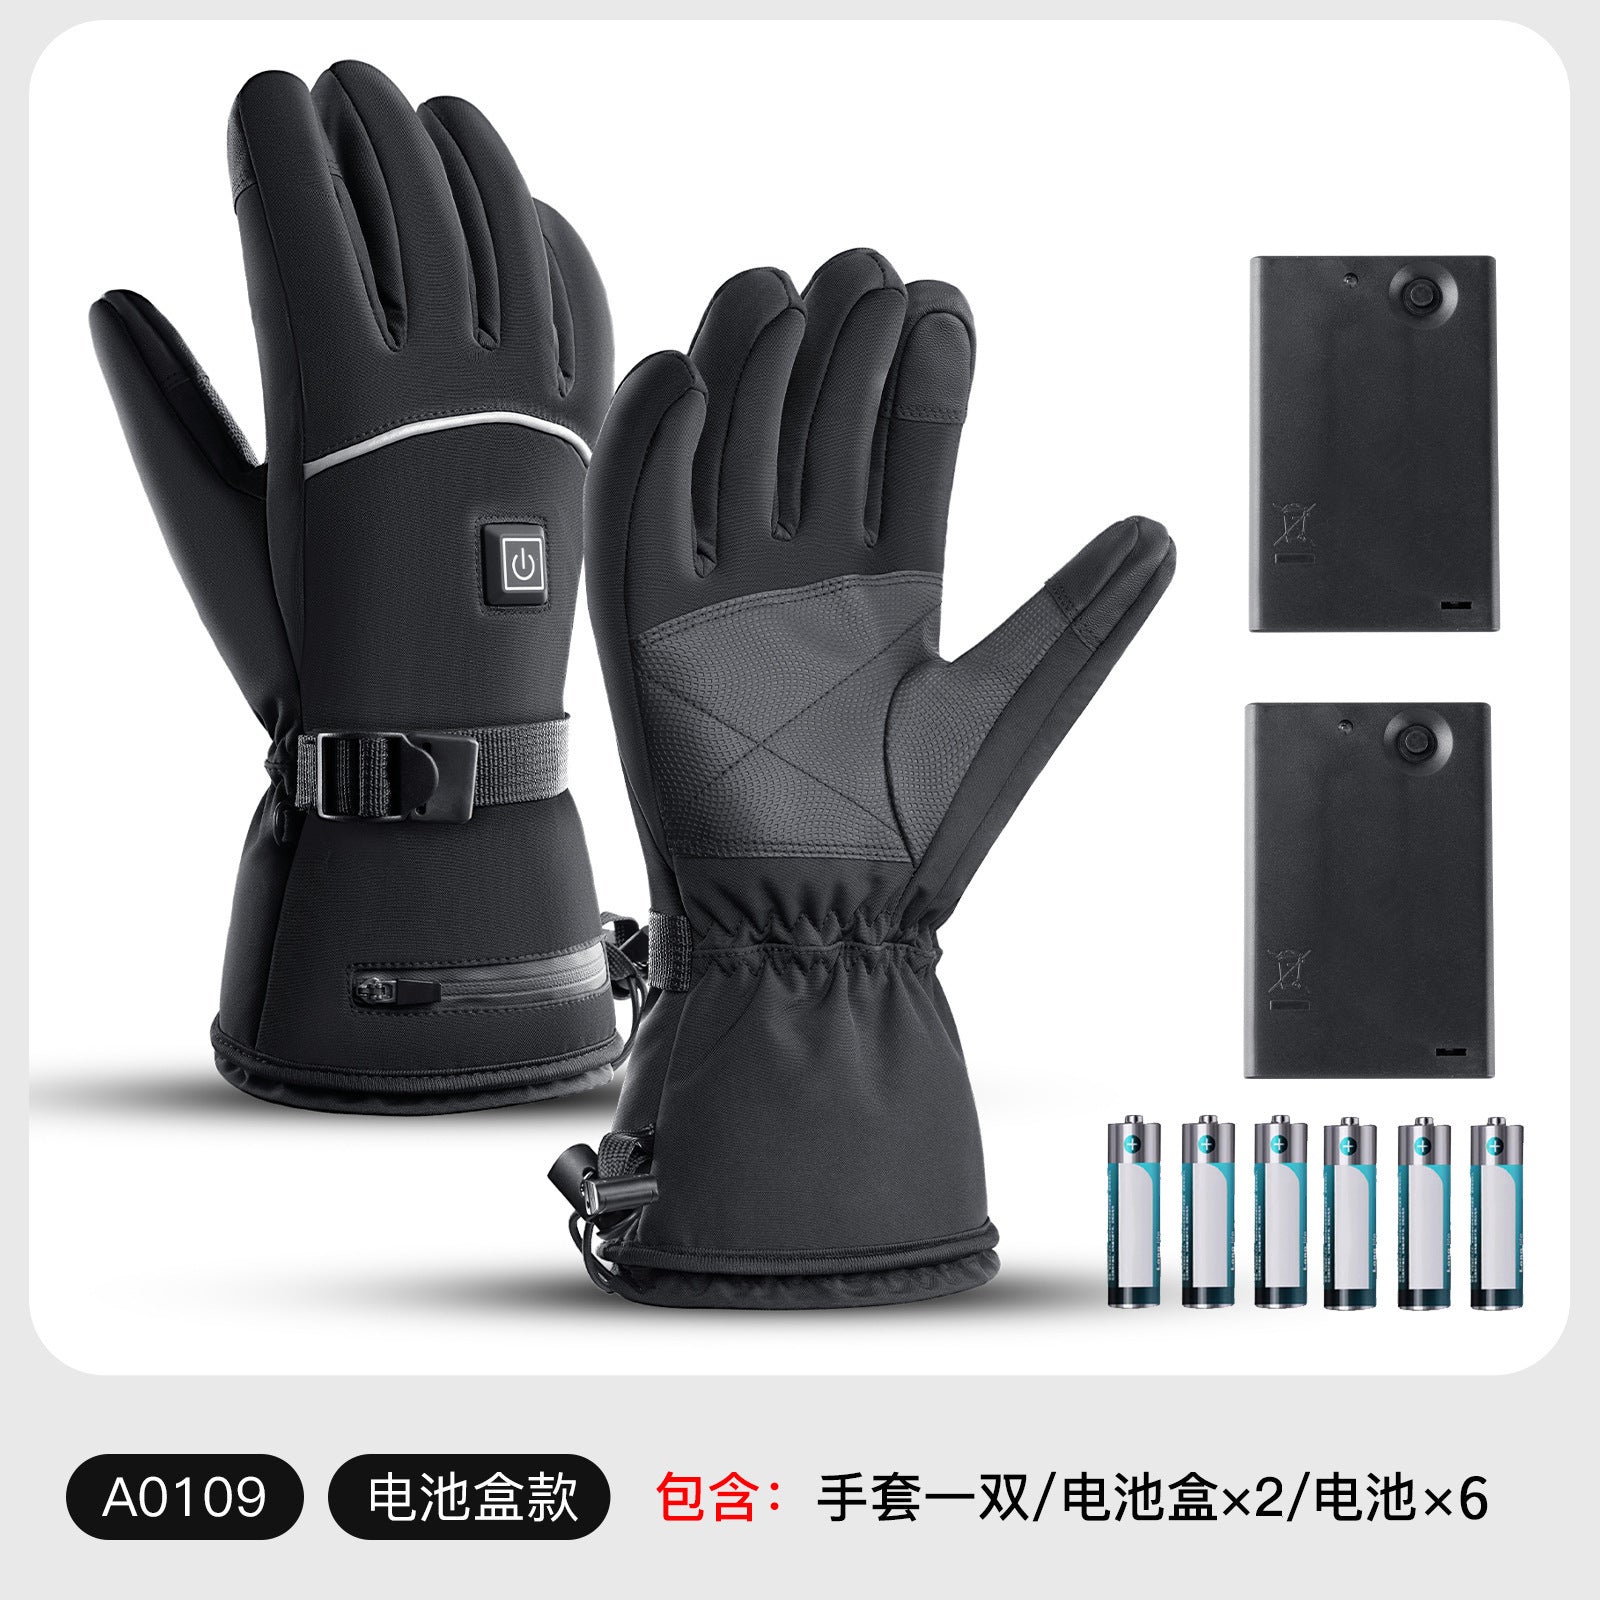 Bicycle Gloves Winter Heating Temperature Control Thermal Gloves Outdoor Sports Thermal Gloves Motorcycle Riding Gloves